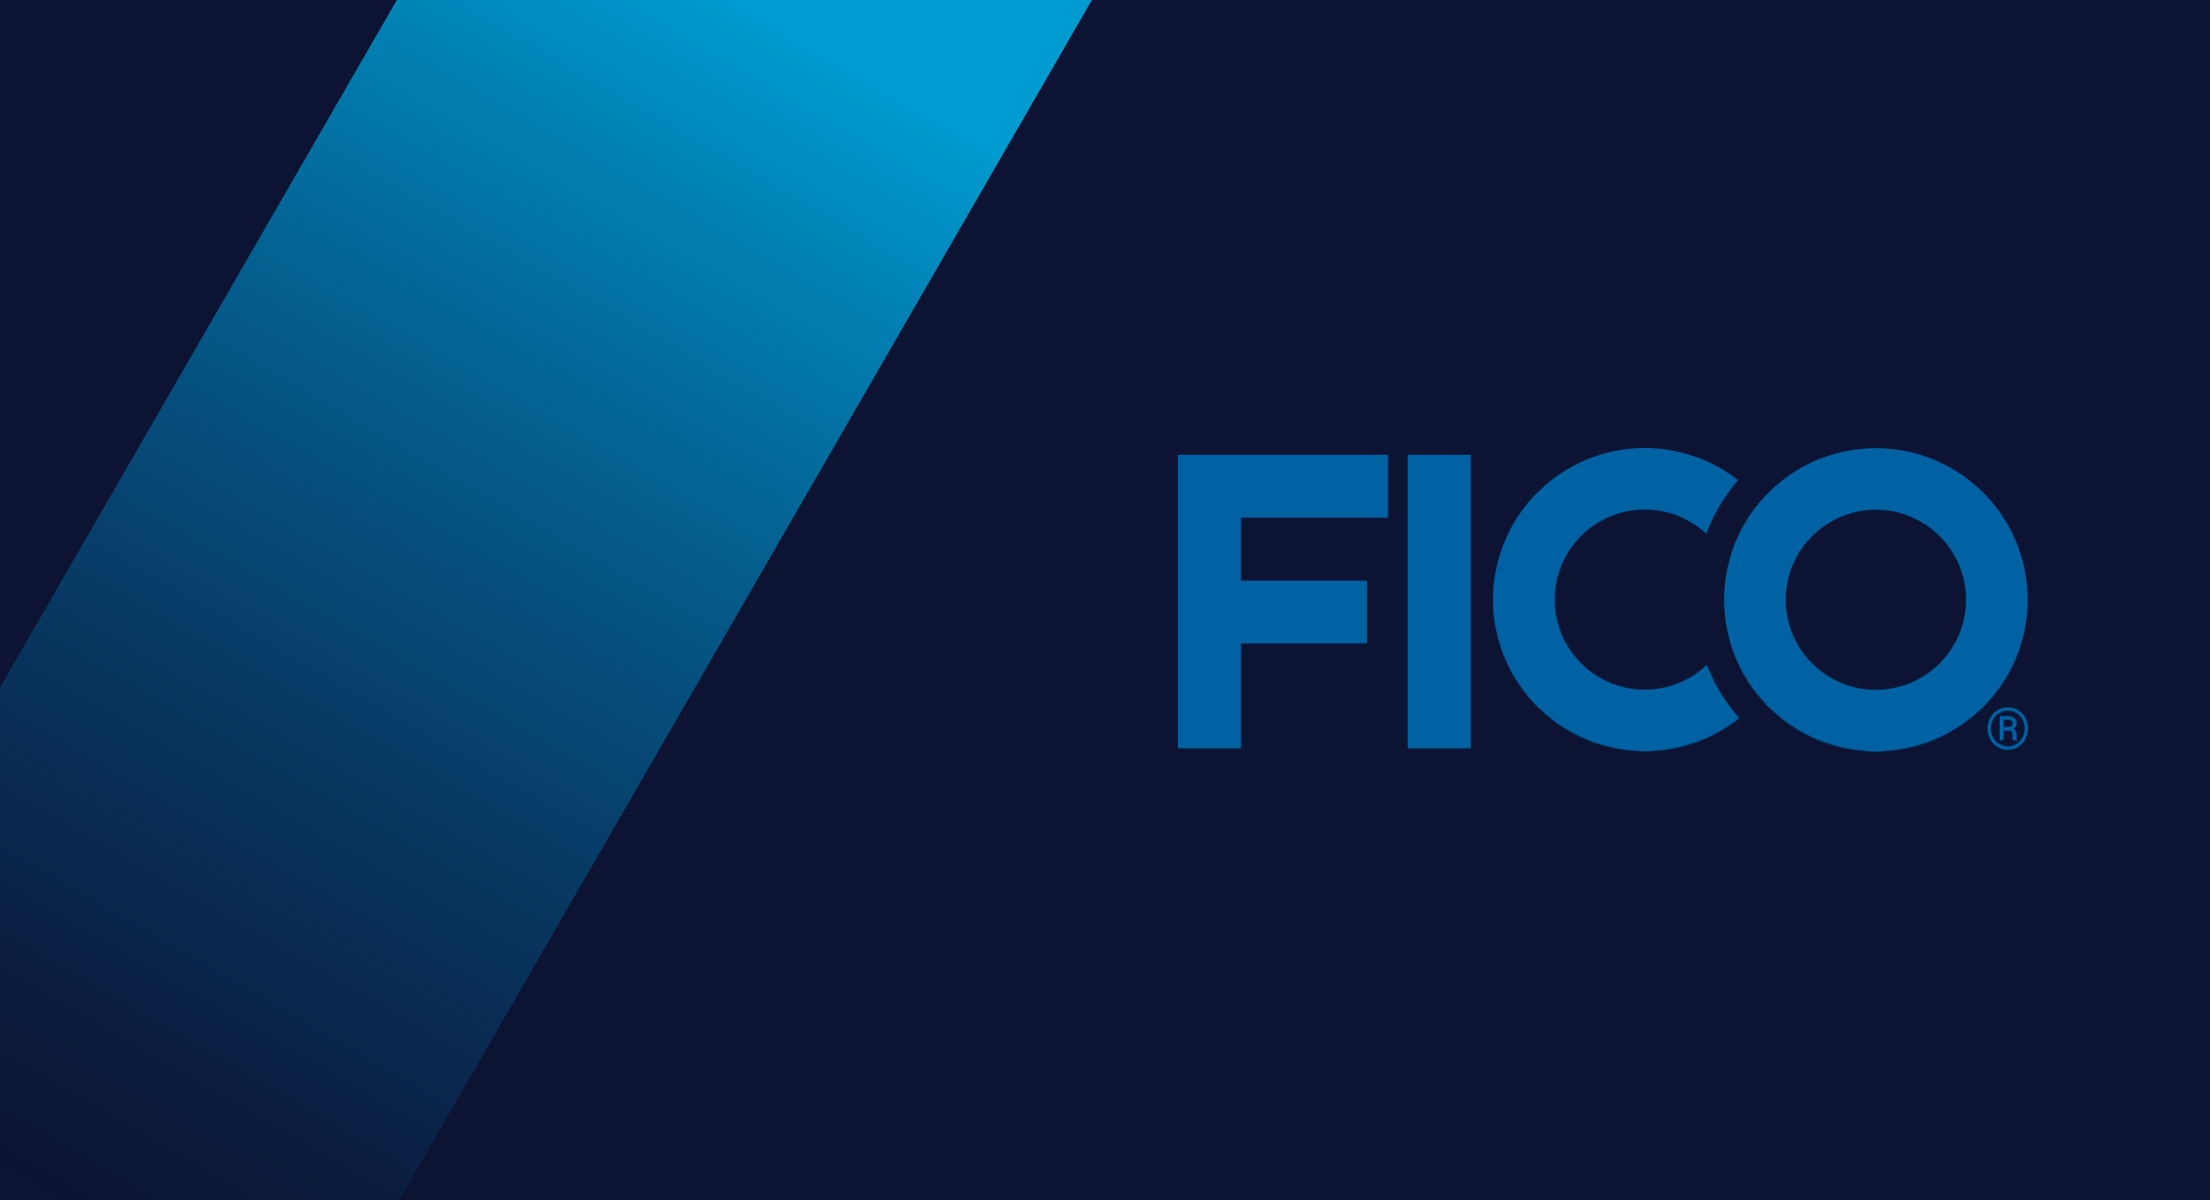 FICO: Measuring and Eliminating Customer Friction